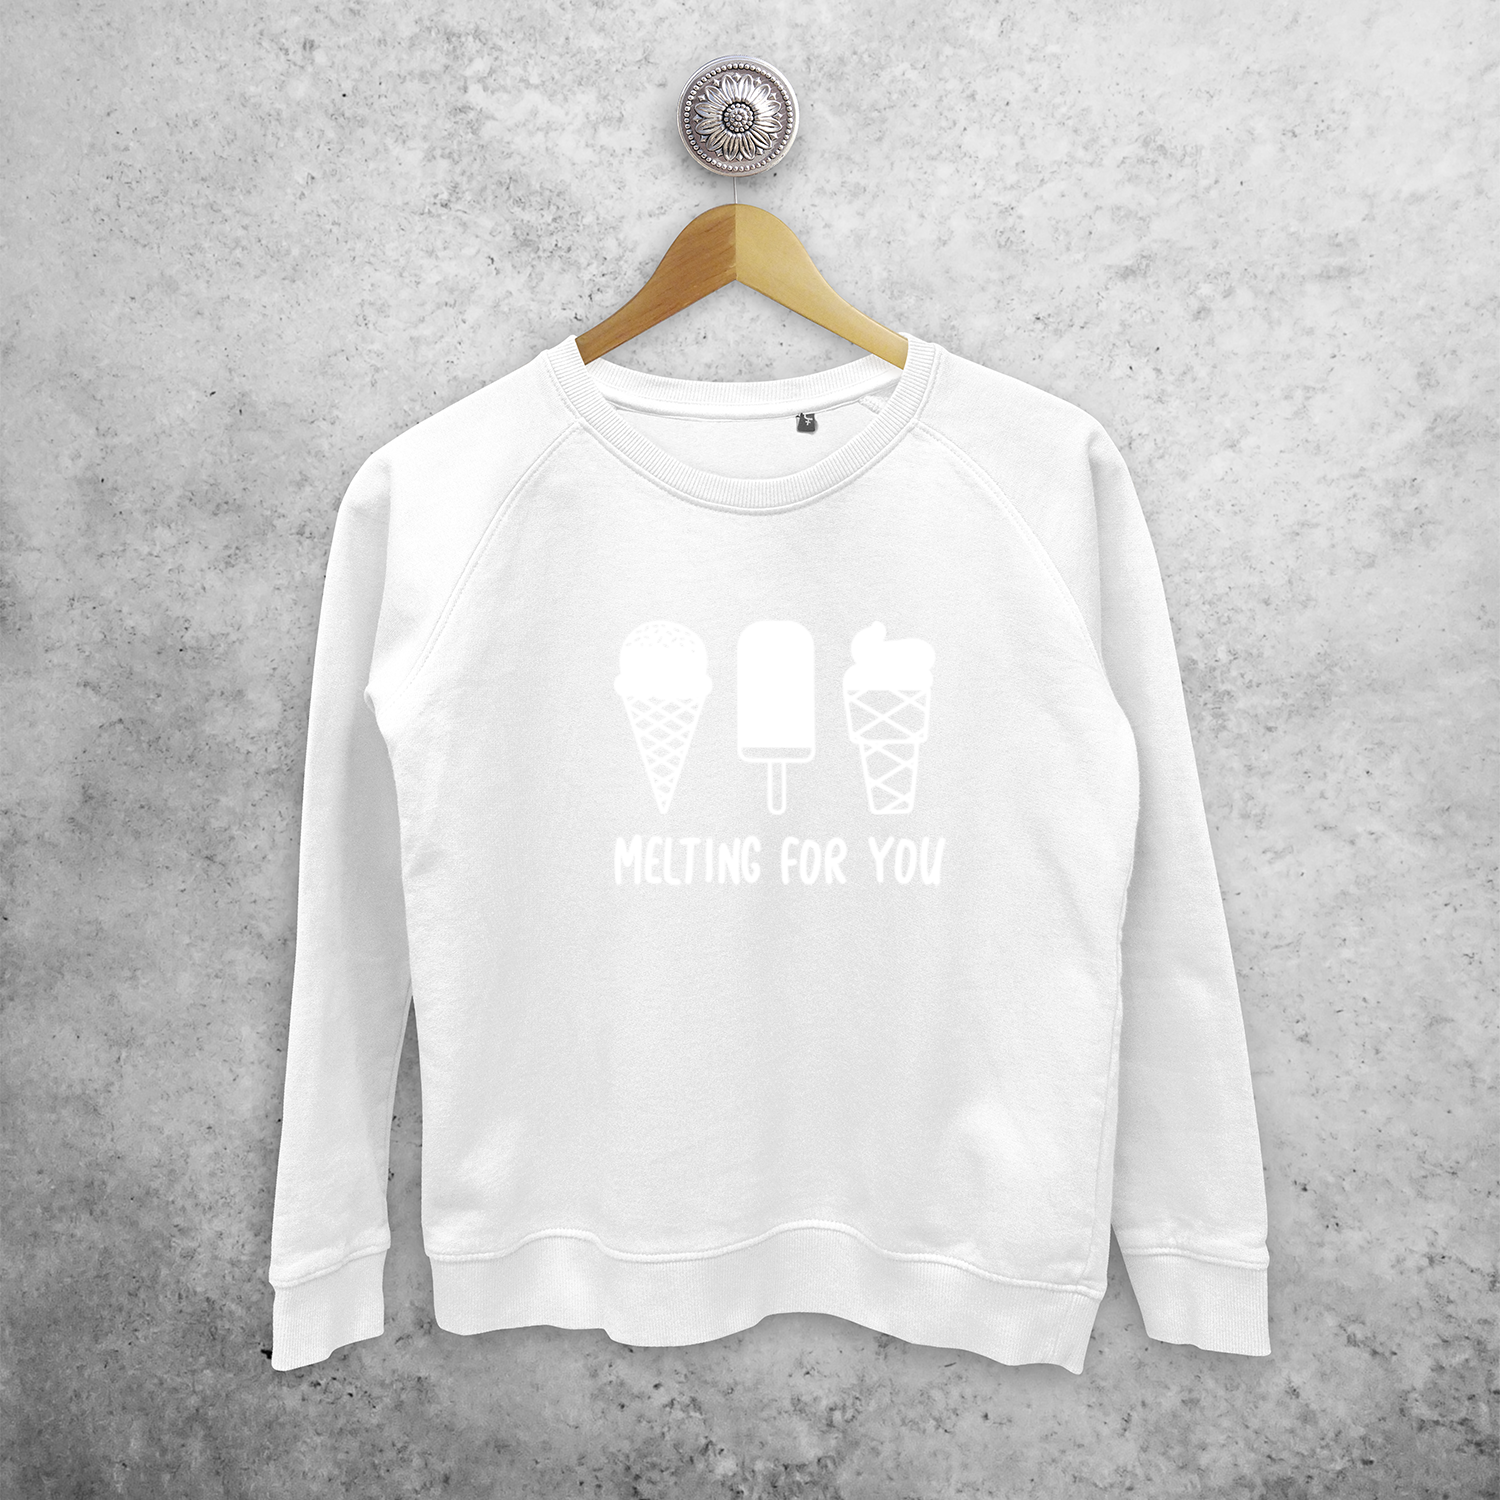 'Melting for you' magic sweater